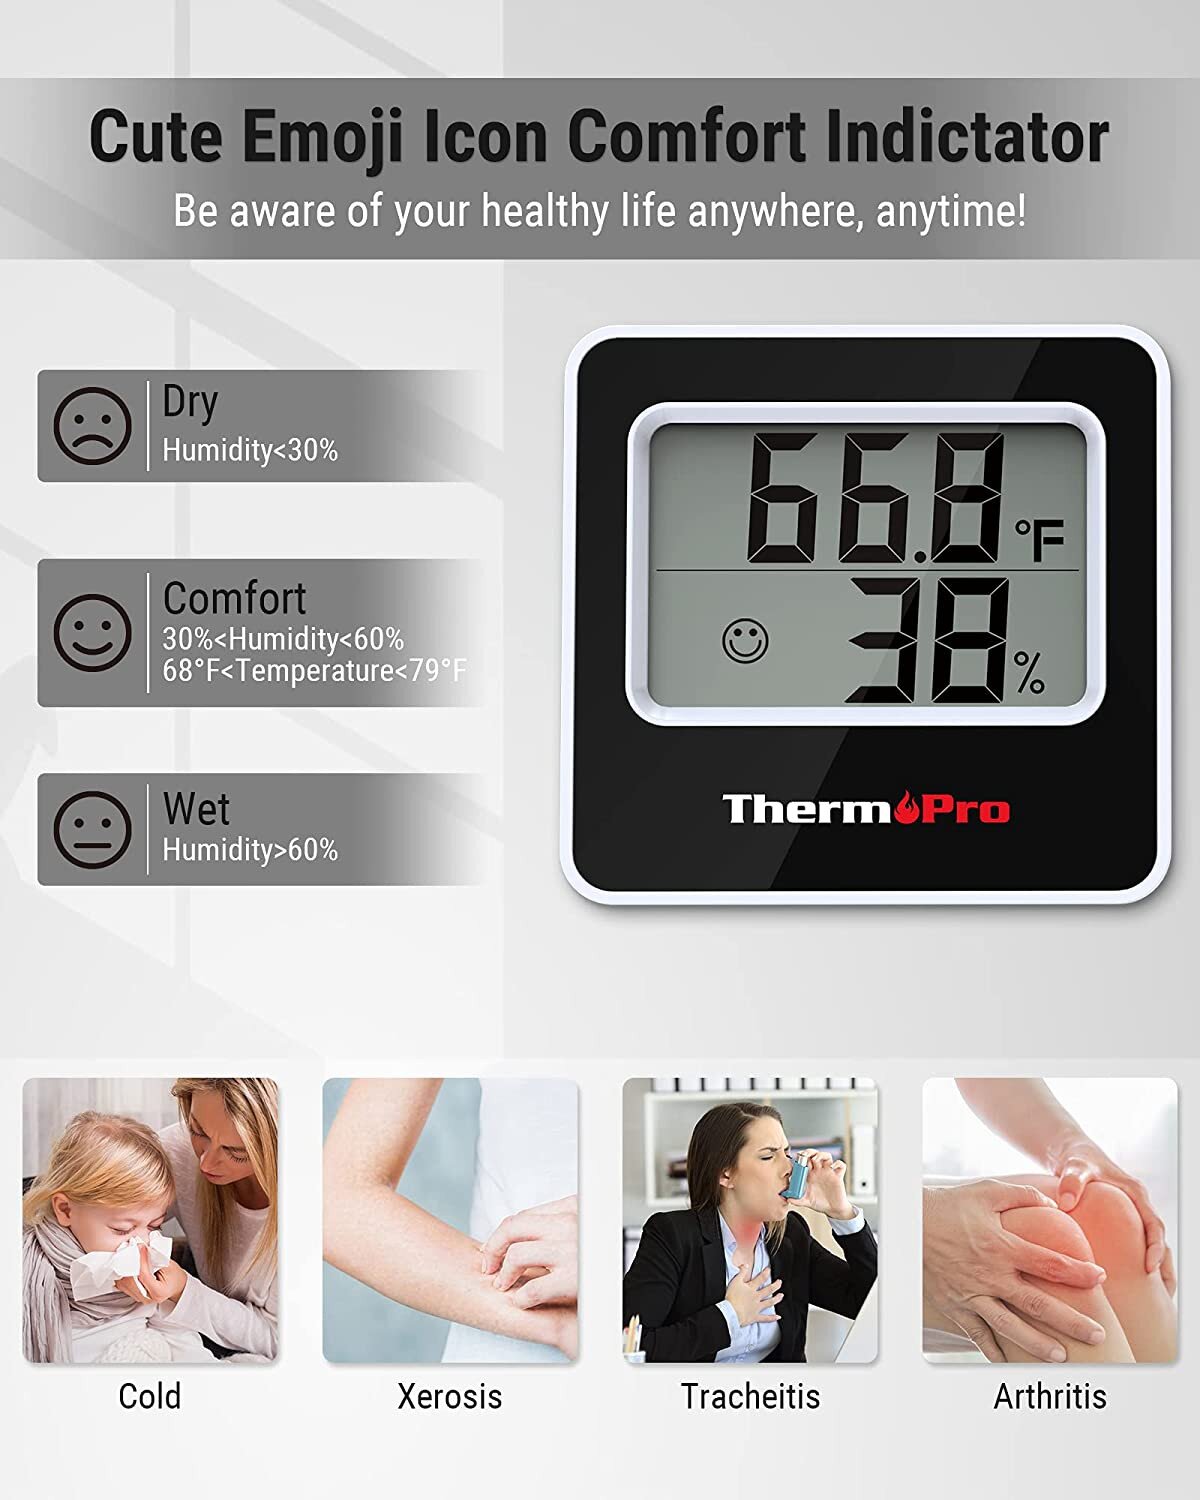 ThermoPro TP49 Indoor Digital Hygrometer Thermometer Temperature